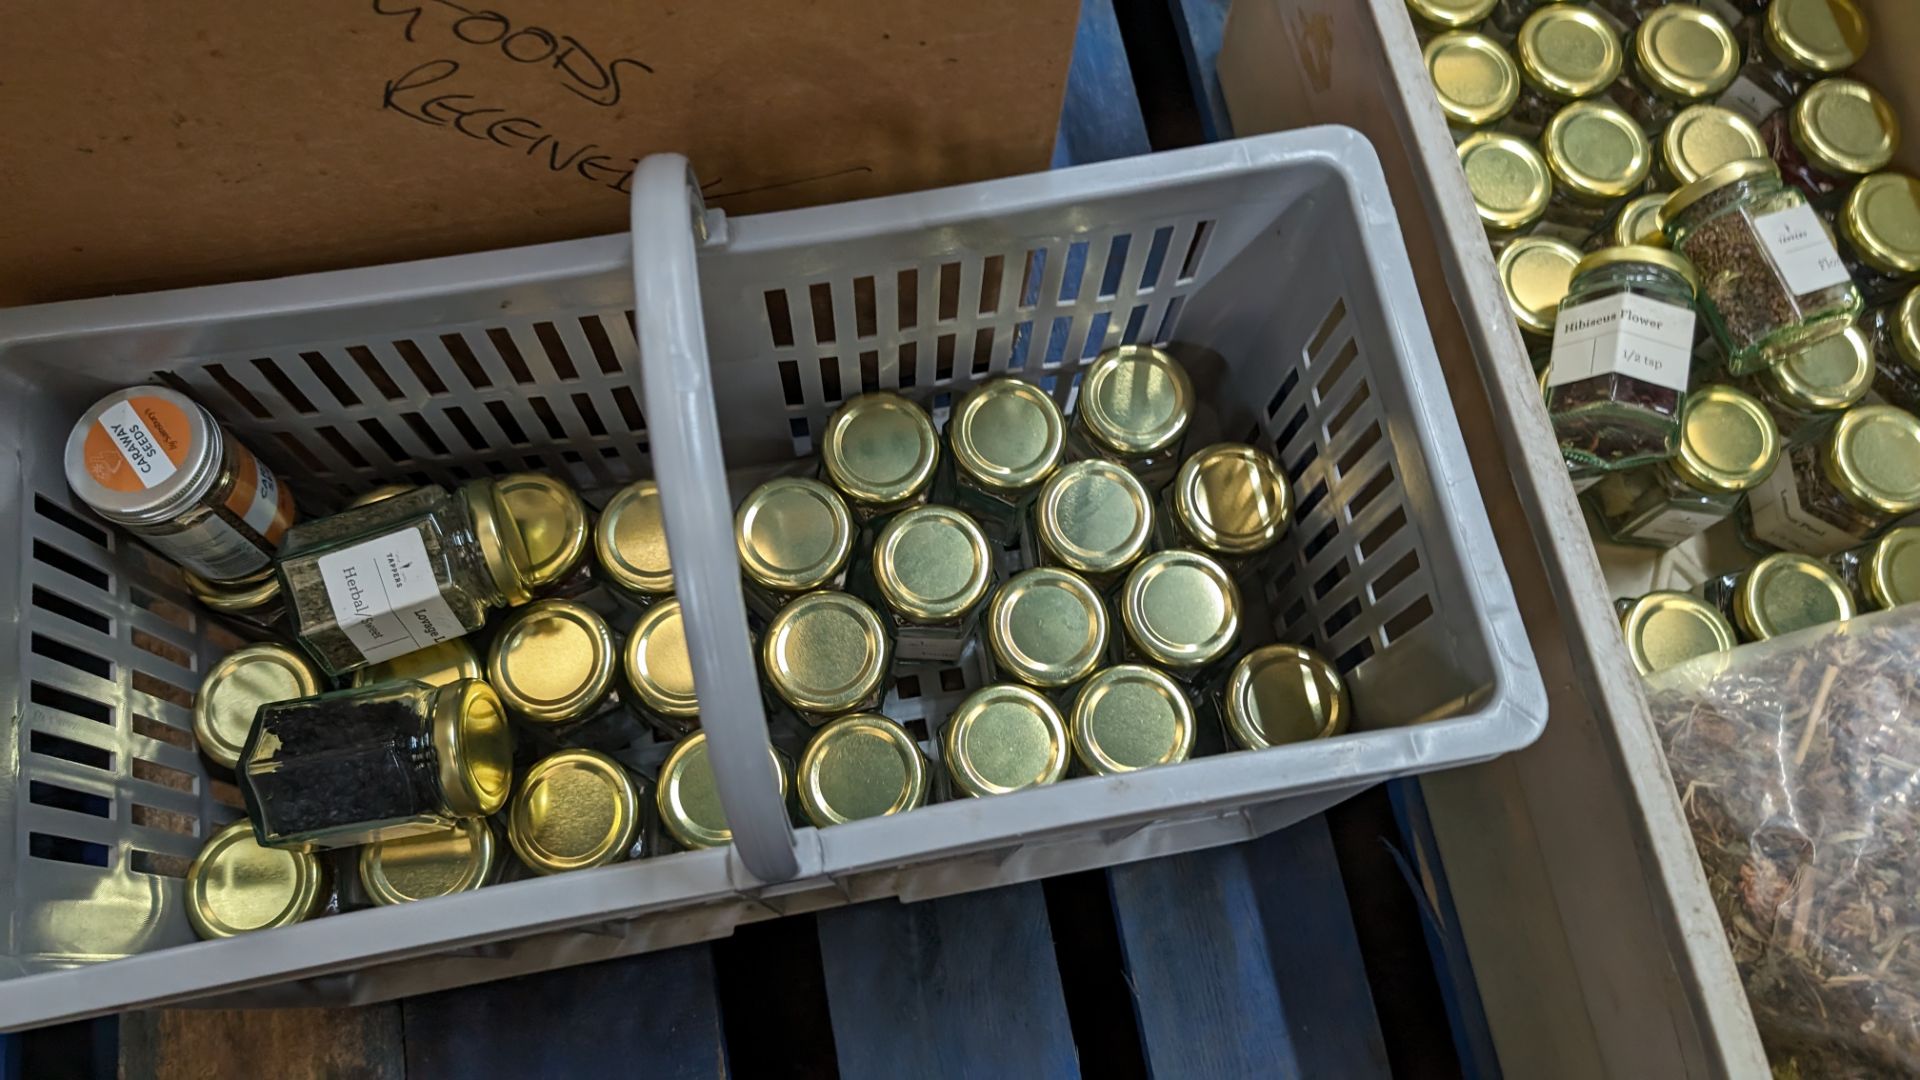 The contents of a pallet of assorted herbs, spices, aromats and more, including all the small glass - Image 9 of 11